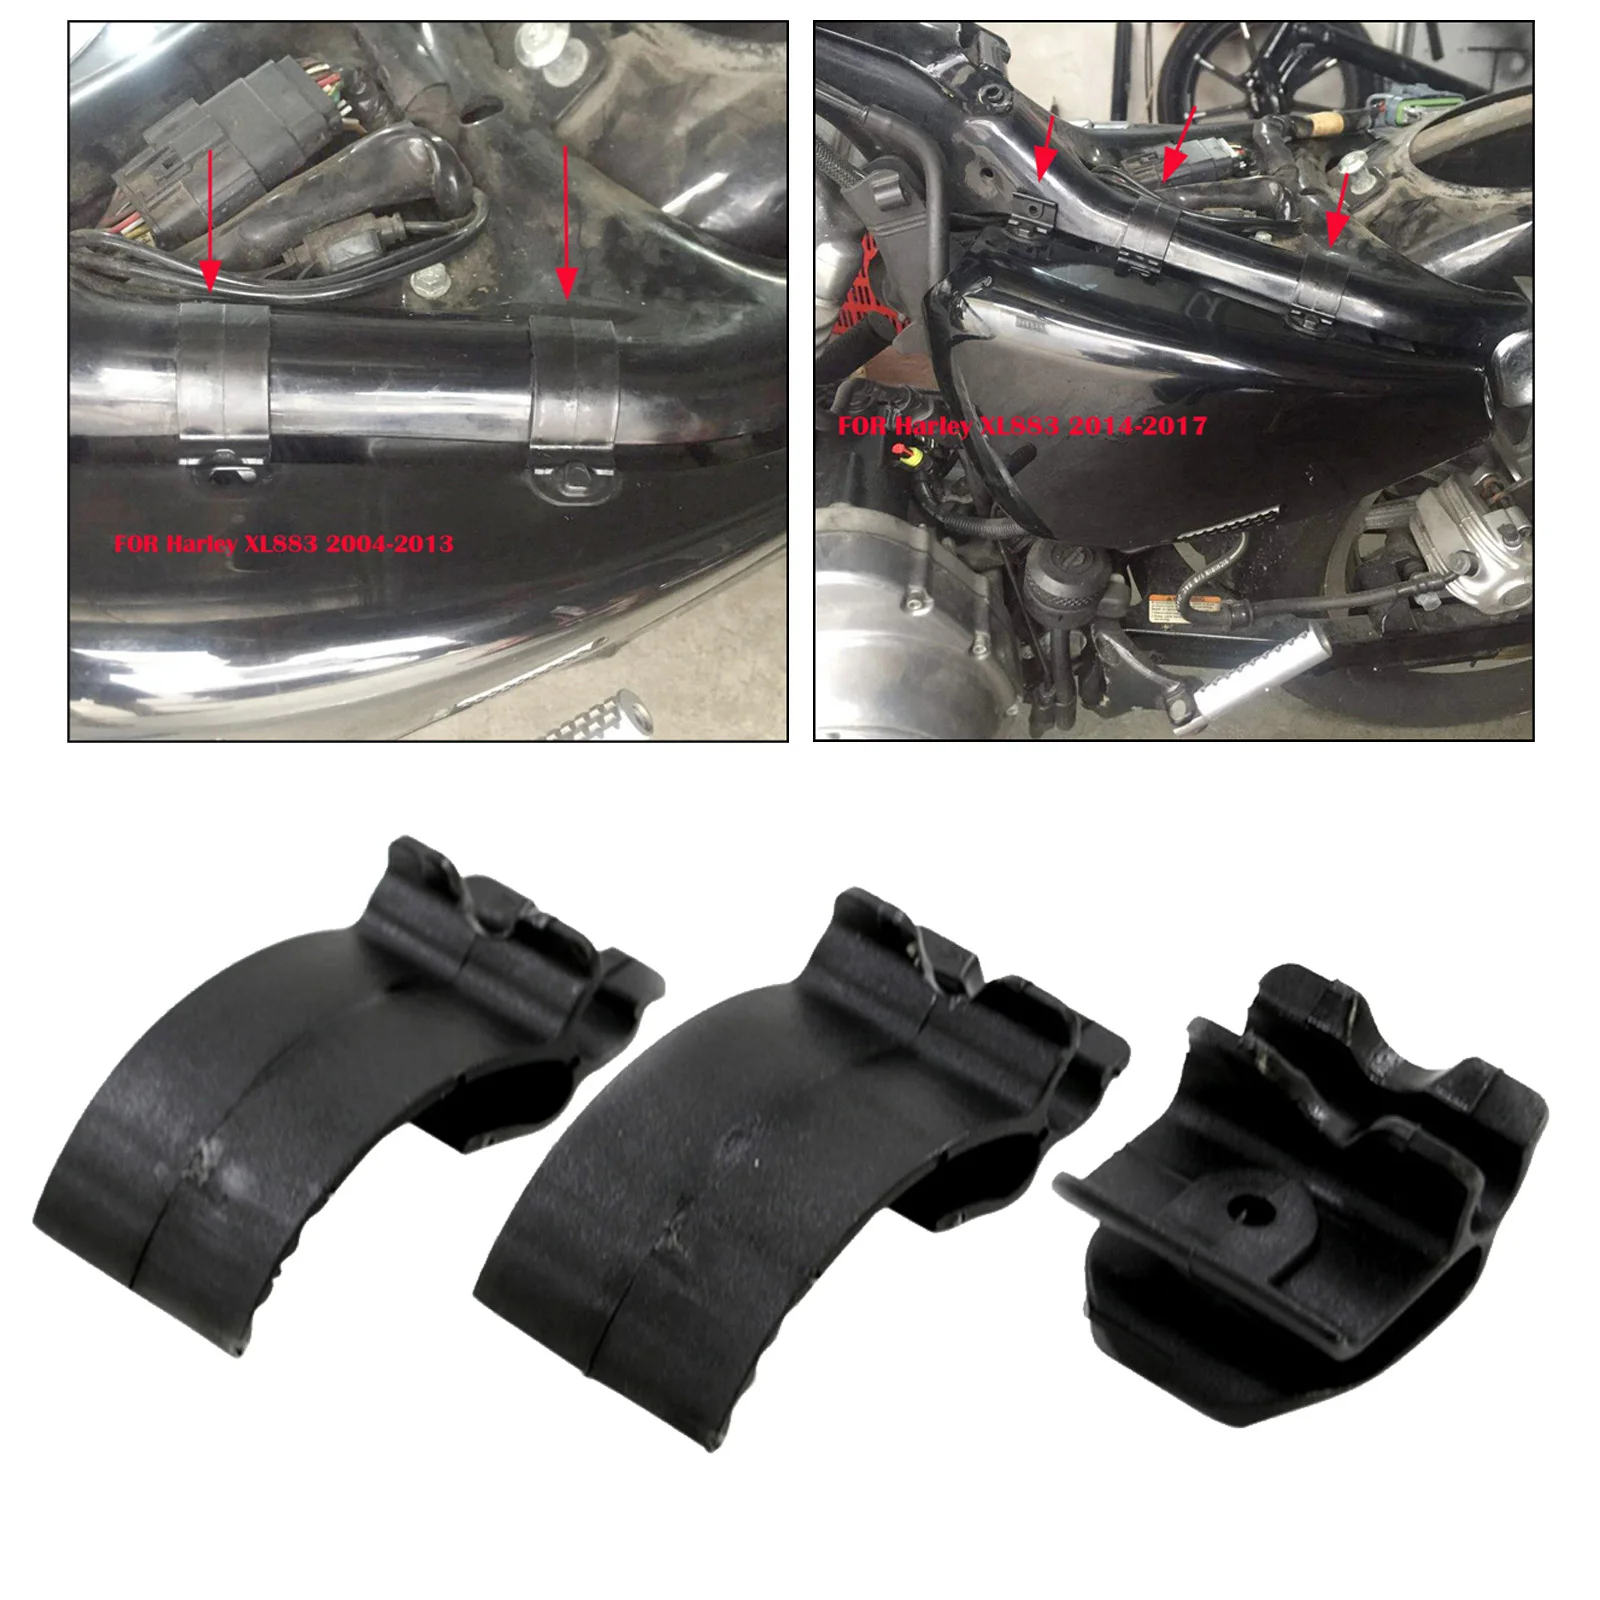 Replacement Side Cover Clips Set for Harley  XL1200 Left Side Battery Cover Mount, Motorcycle Spare Parts